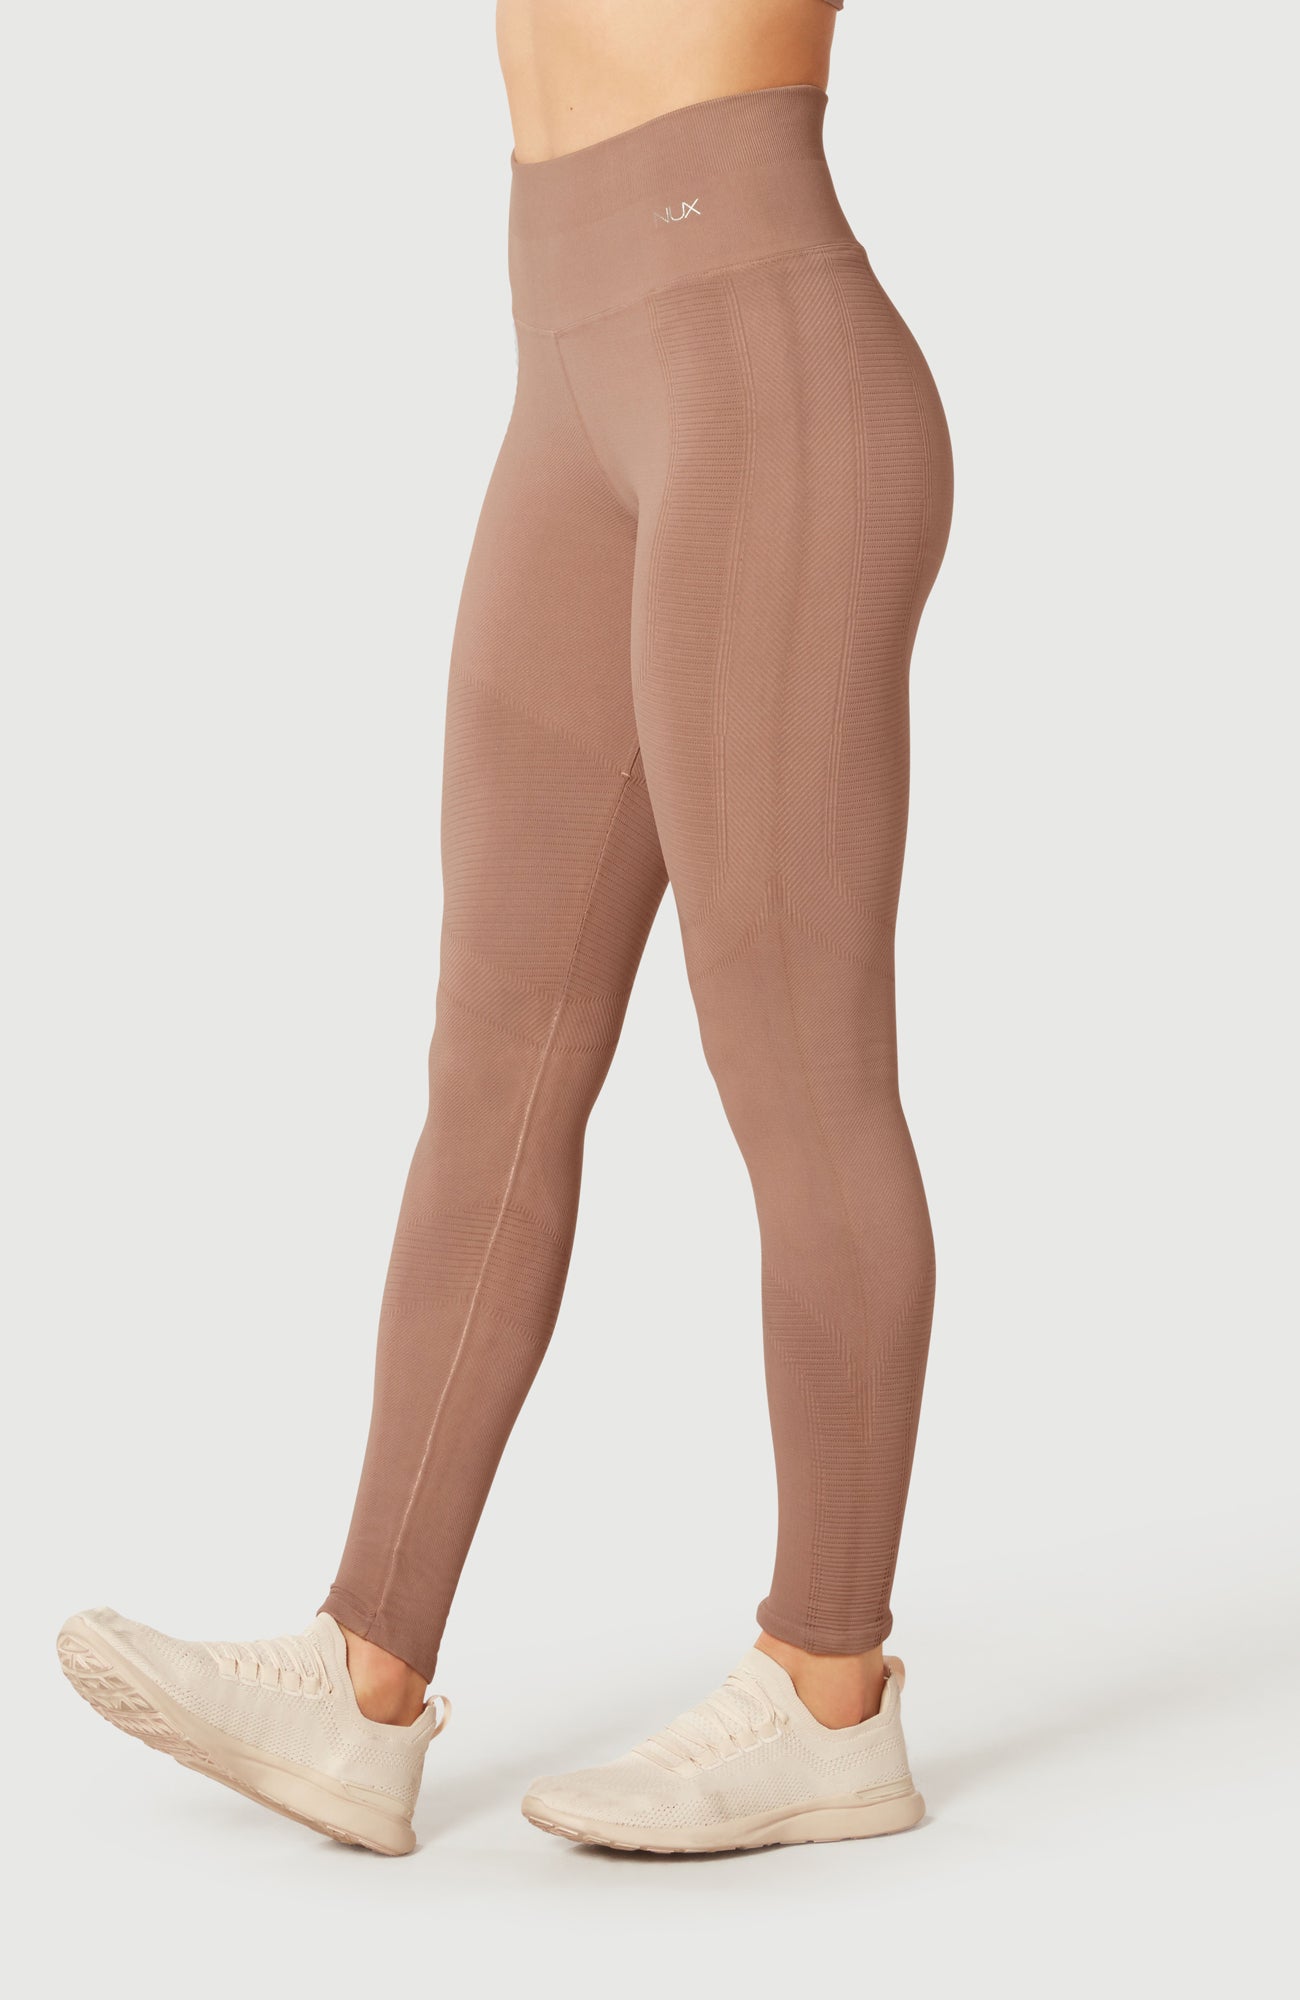 Unique Design Basin and Range x Nux One By One Legging - Women's Discount  Sales Up 50%